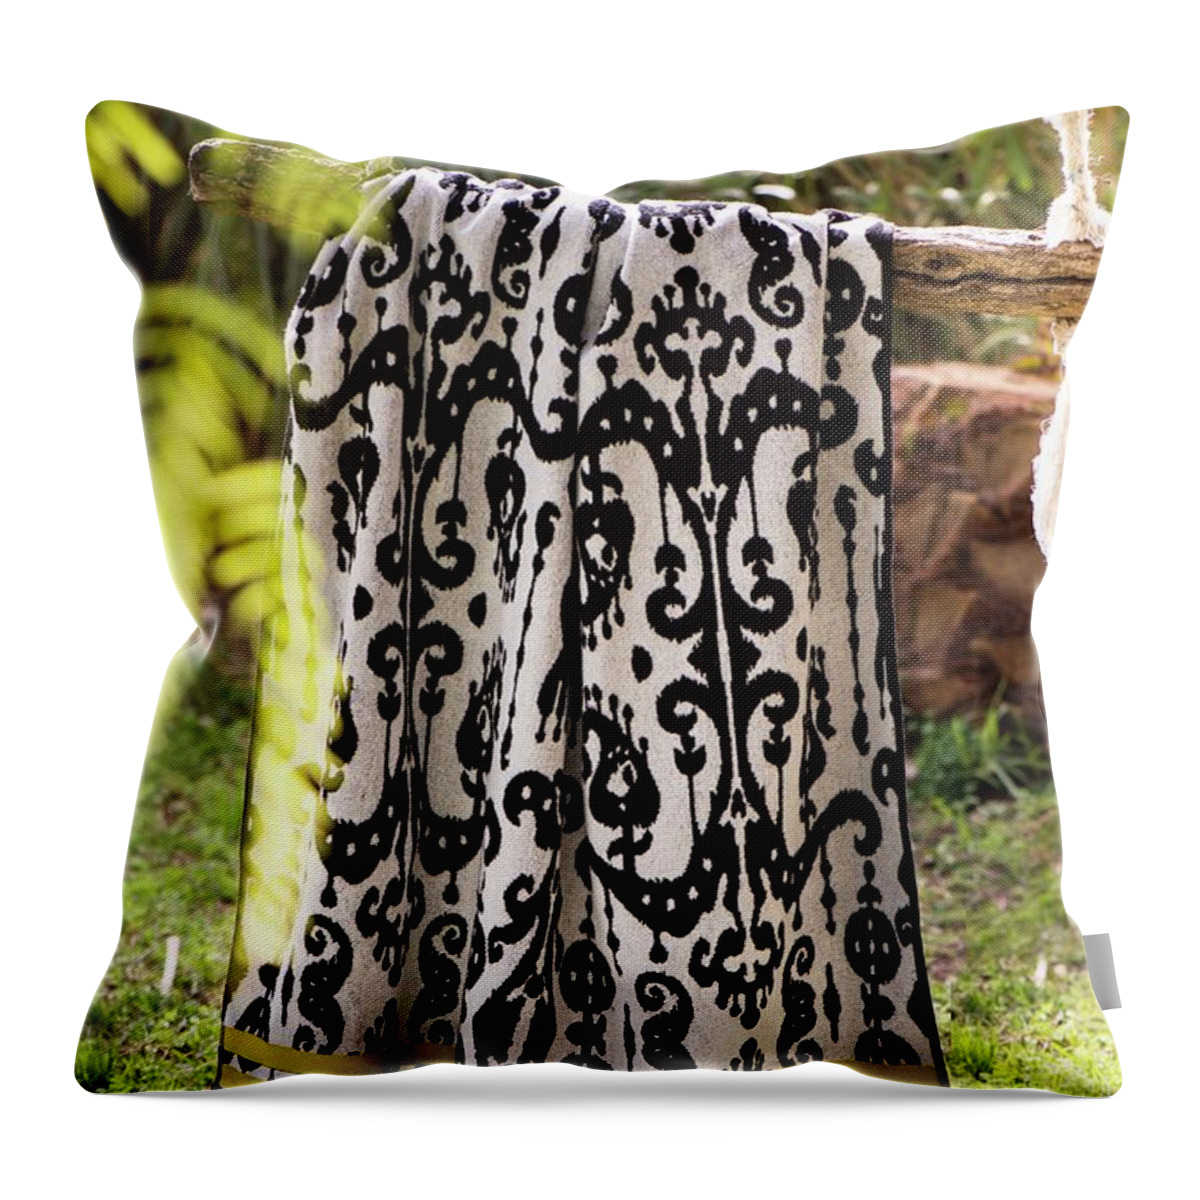 Ip_11507726 Throw Pillow featuring the photograph Ornately Patterned Towel Hanging In Garden by Winfried Heinze